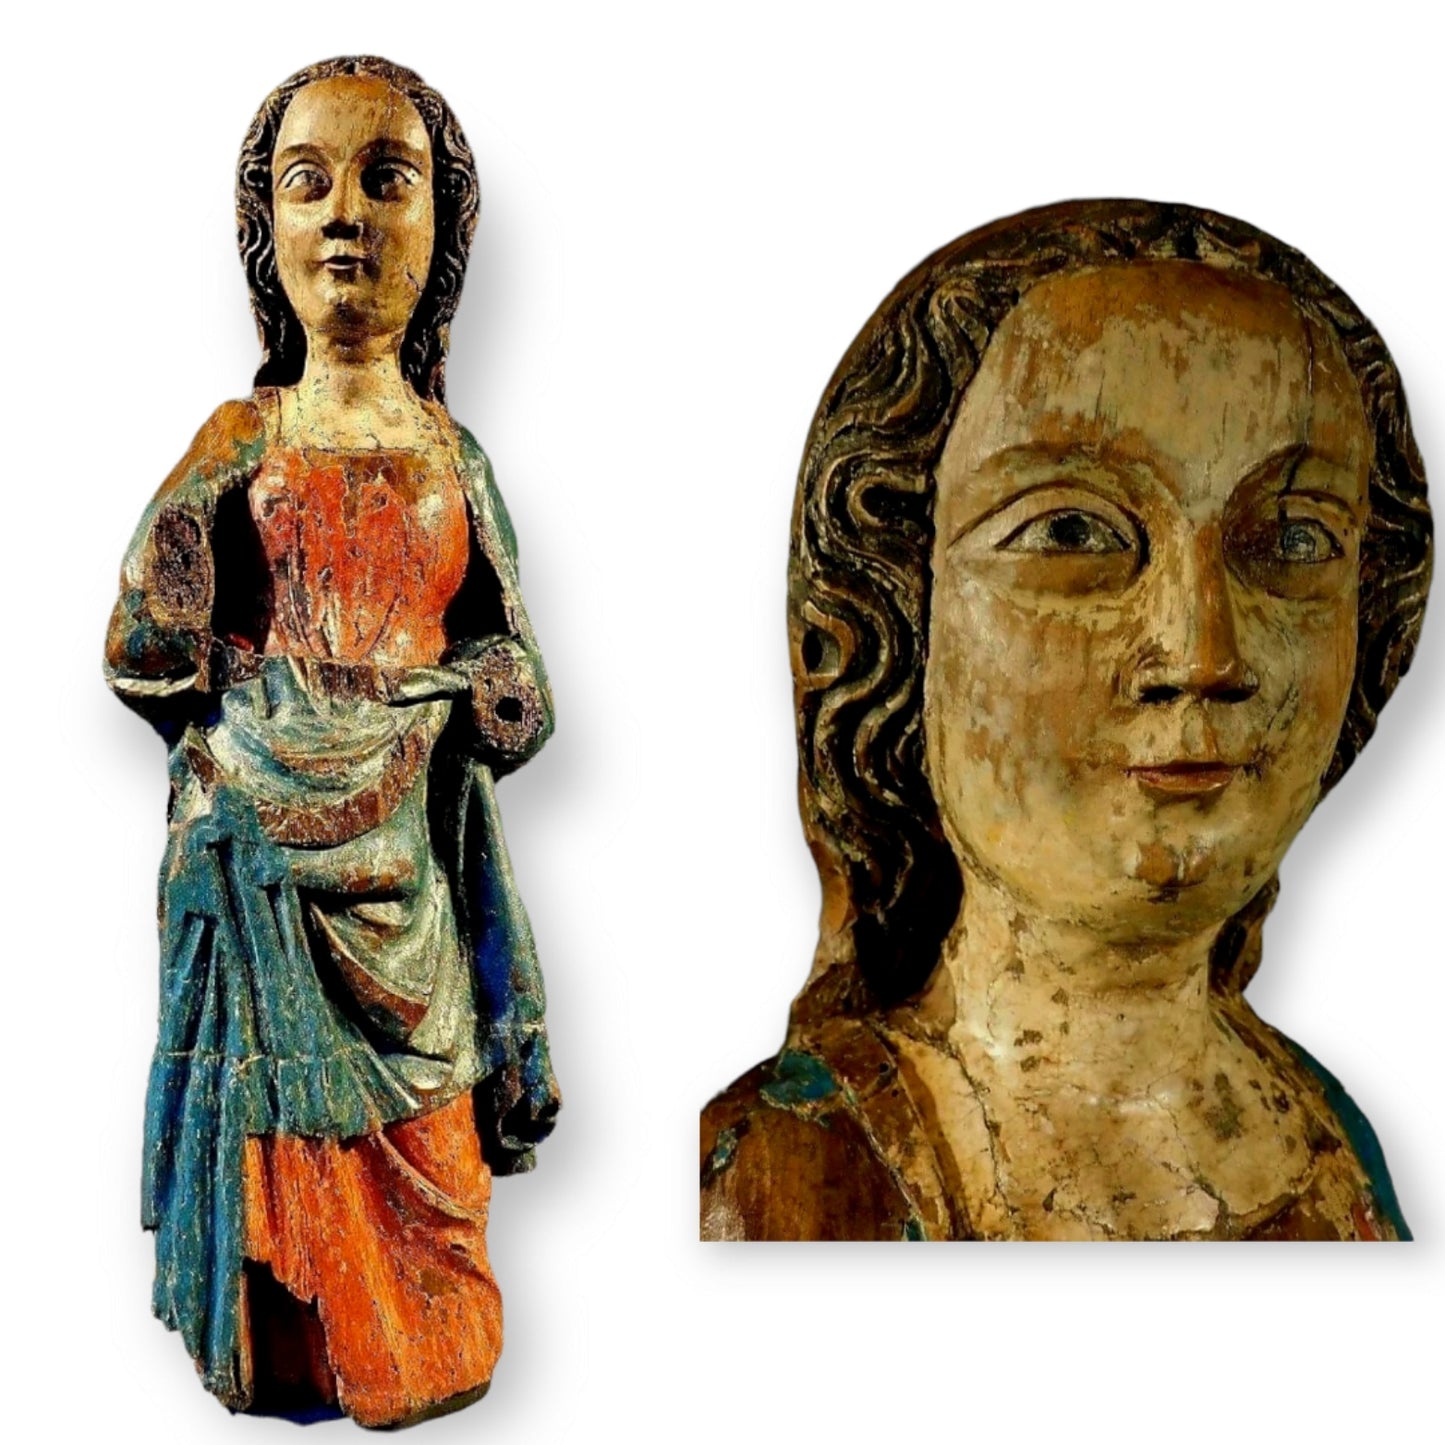 Late 15th Century German Antique Carved Oak Sculpture of a Female Saint, Possibly The Virgin Mary